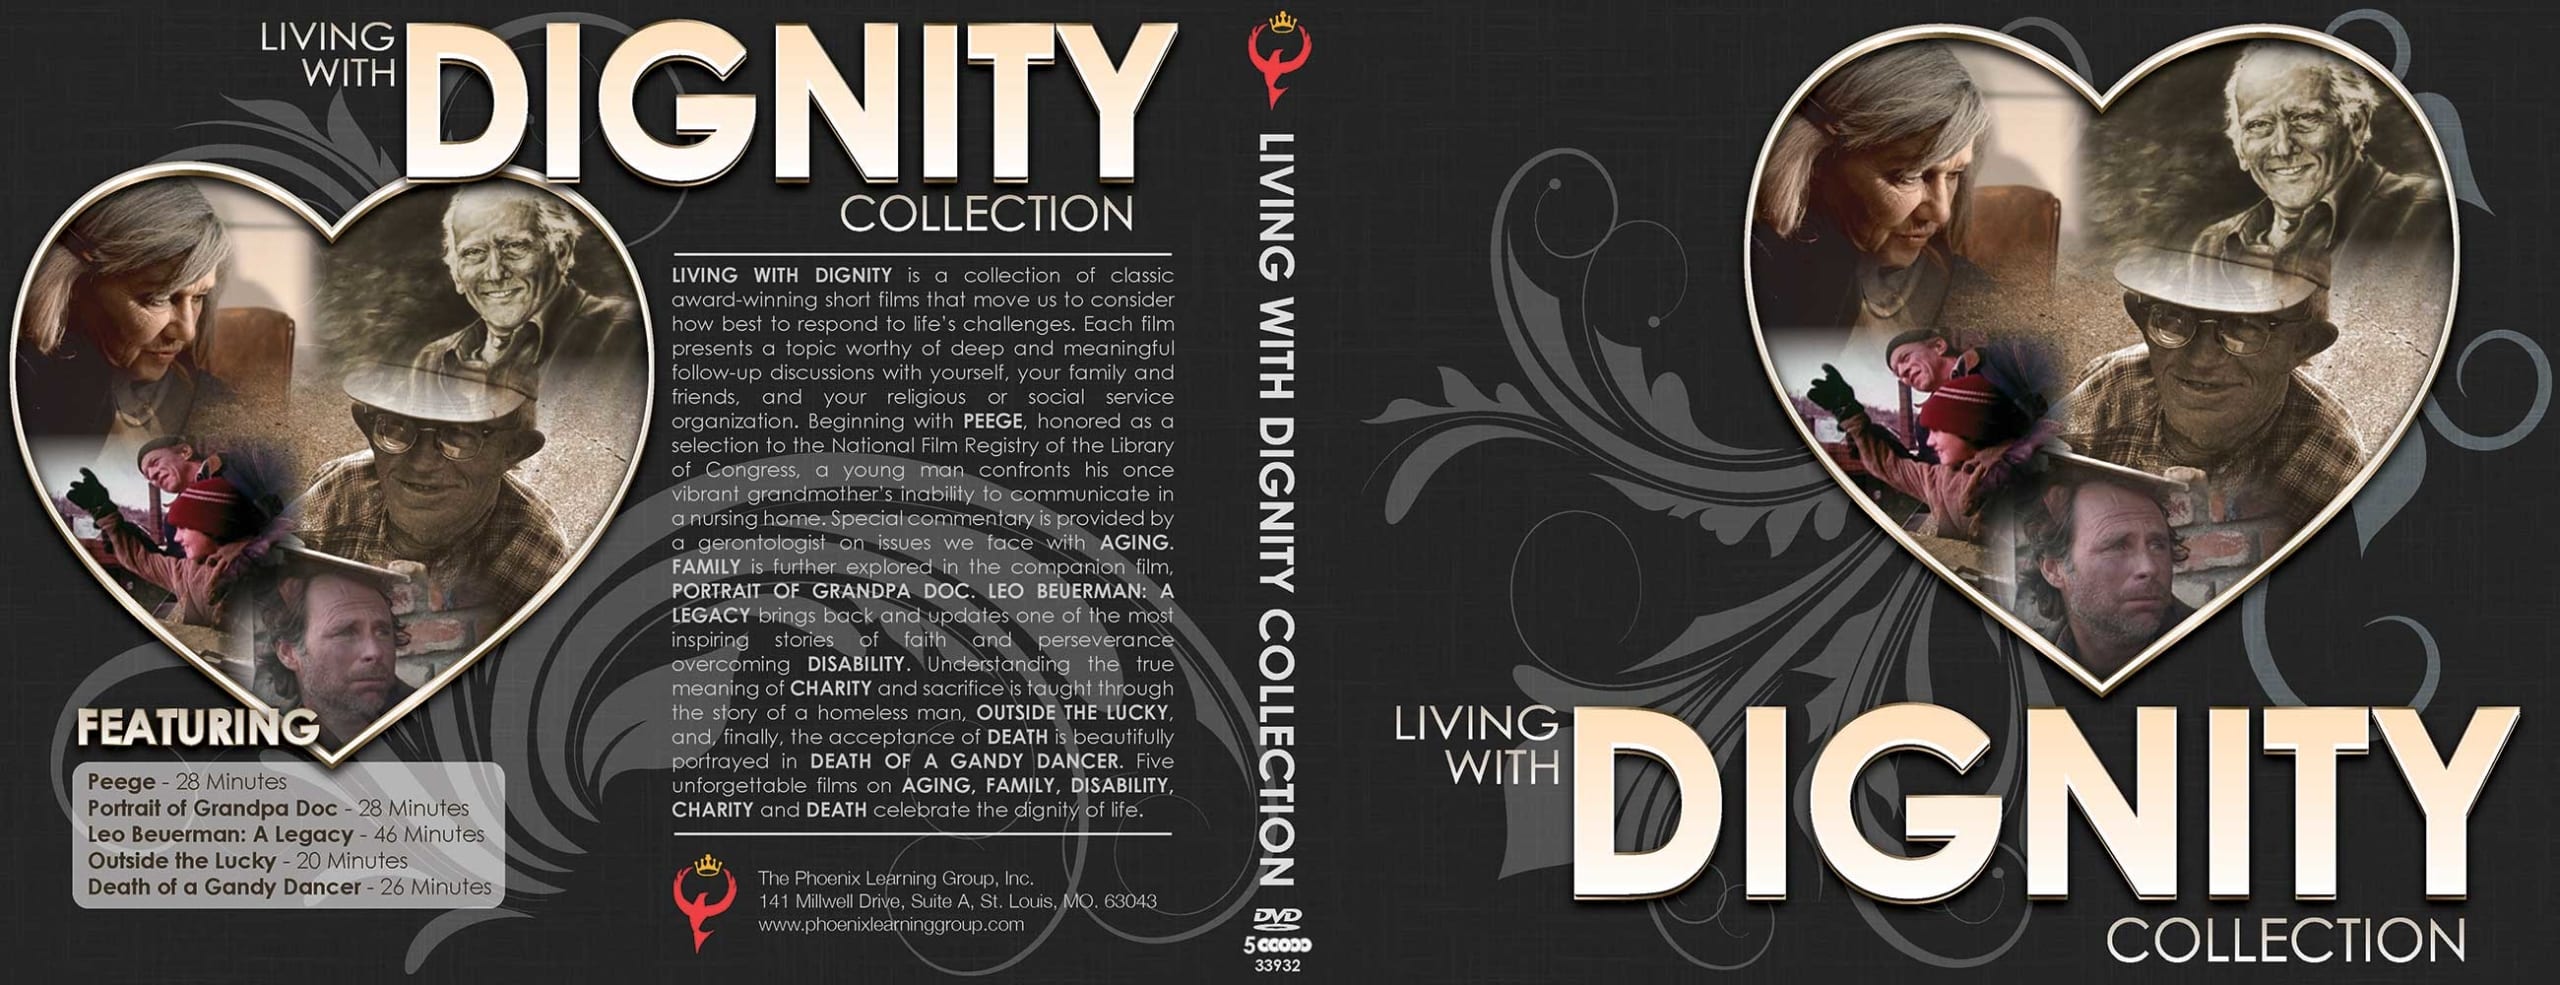 Living with Dignity DVD Wrap Artwork